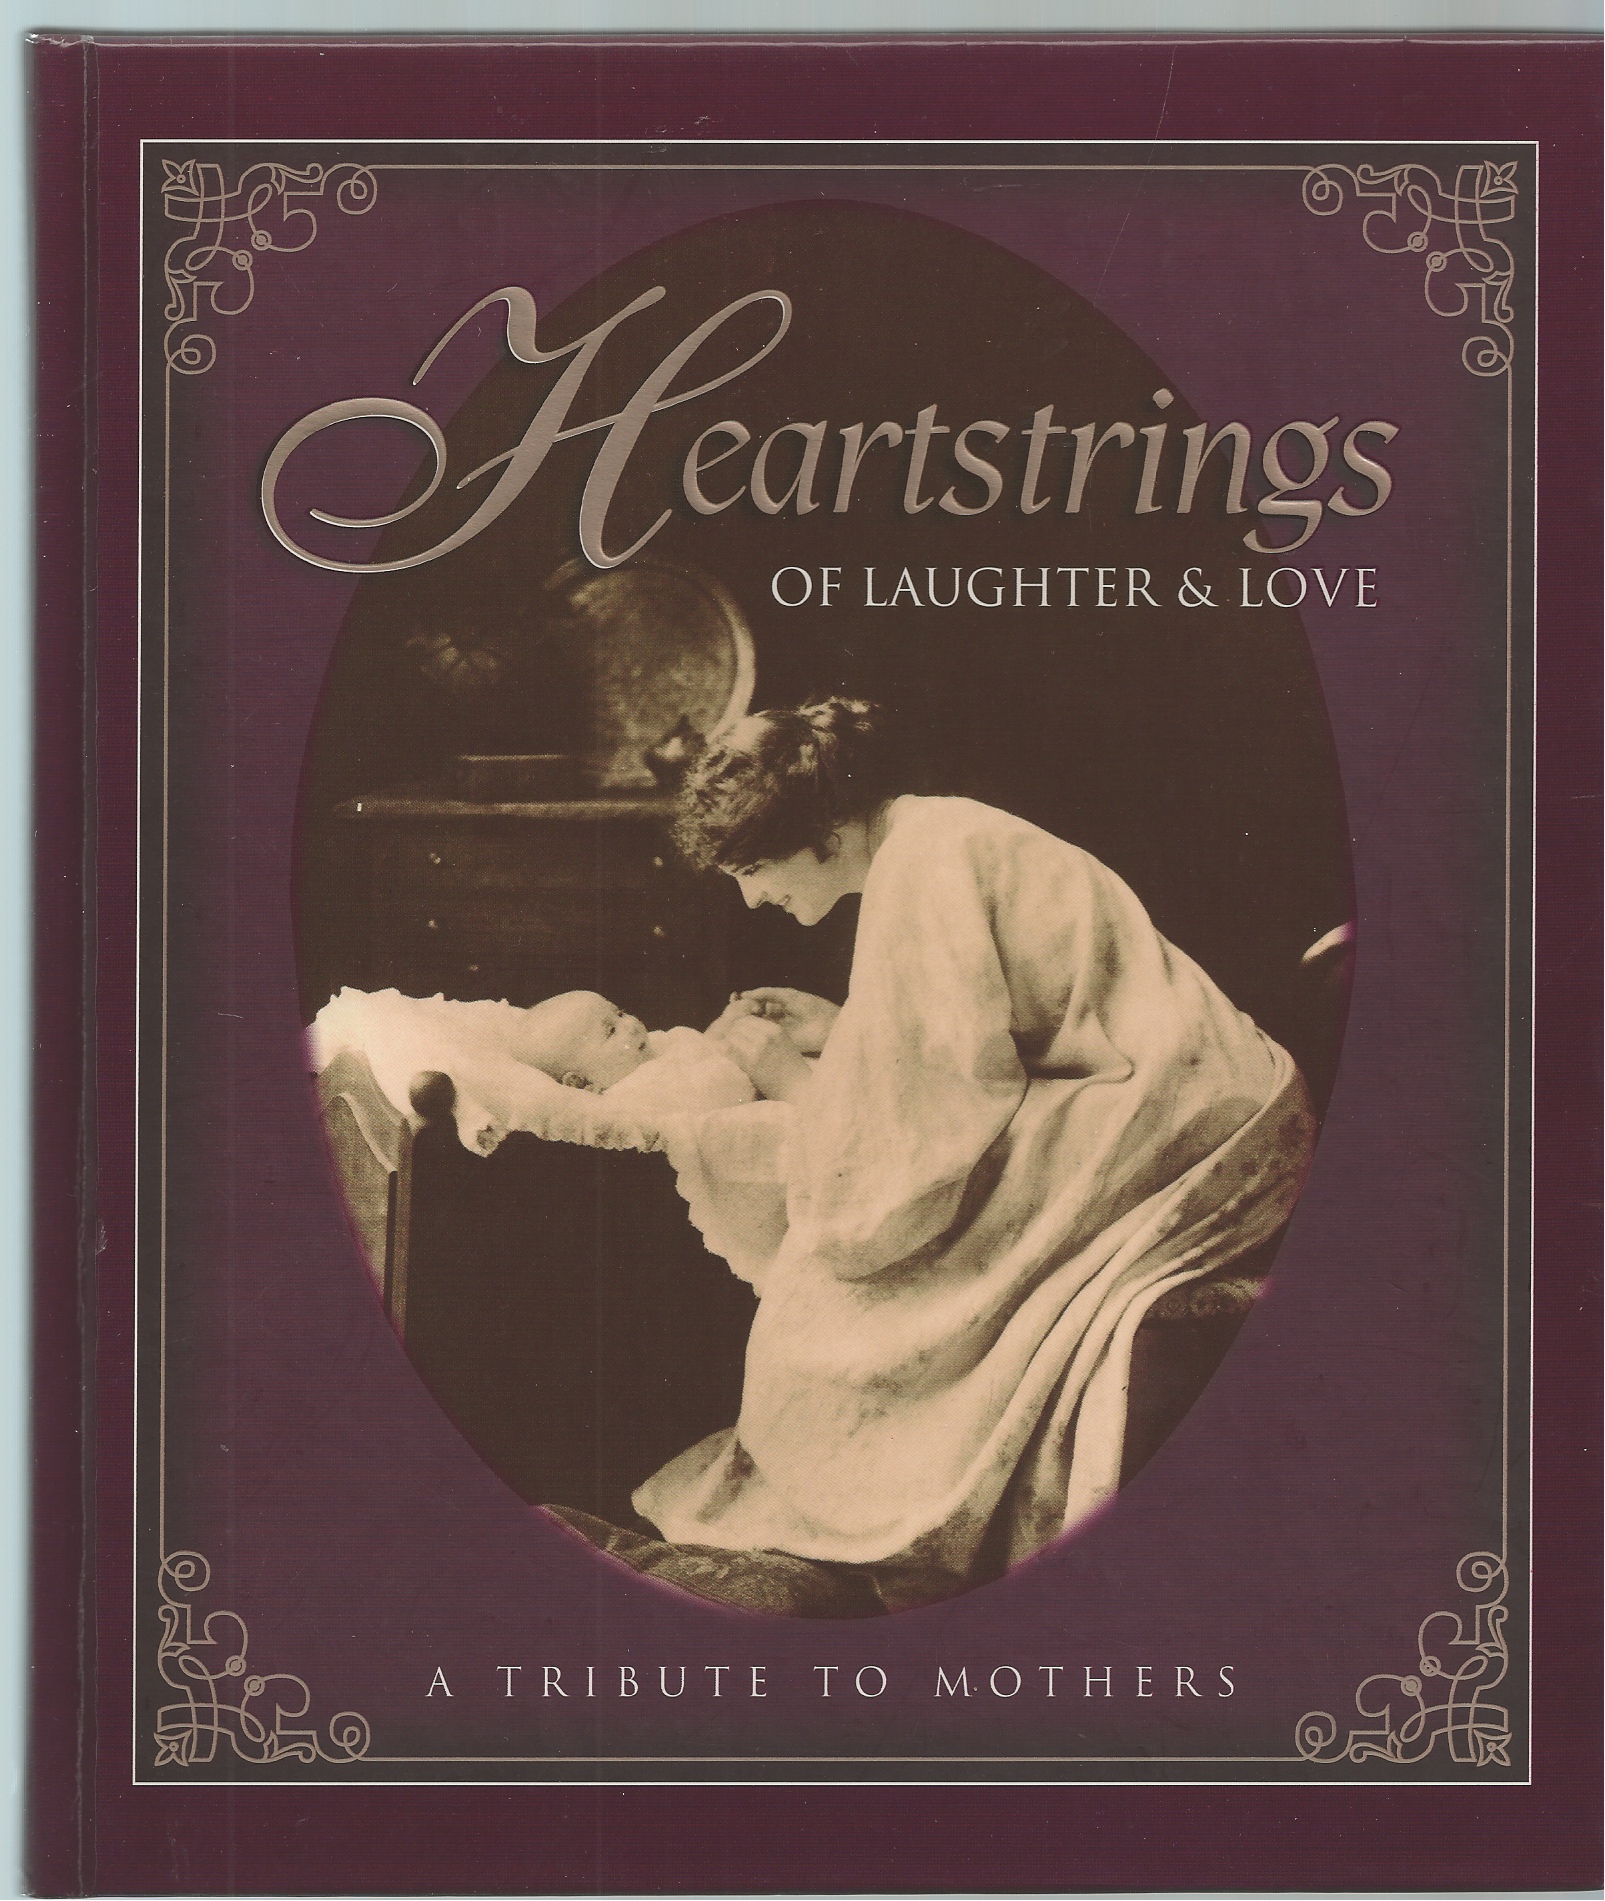 GIBBS TERRI (EDITOR) - Heartstrings of Laughter and Love a Tribute to Mothers